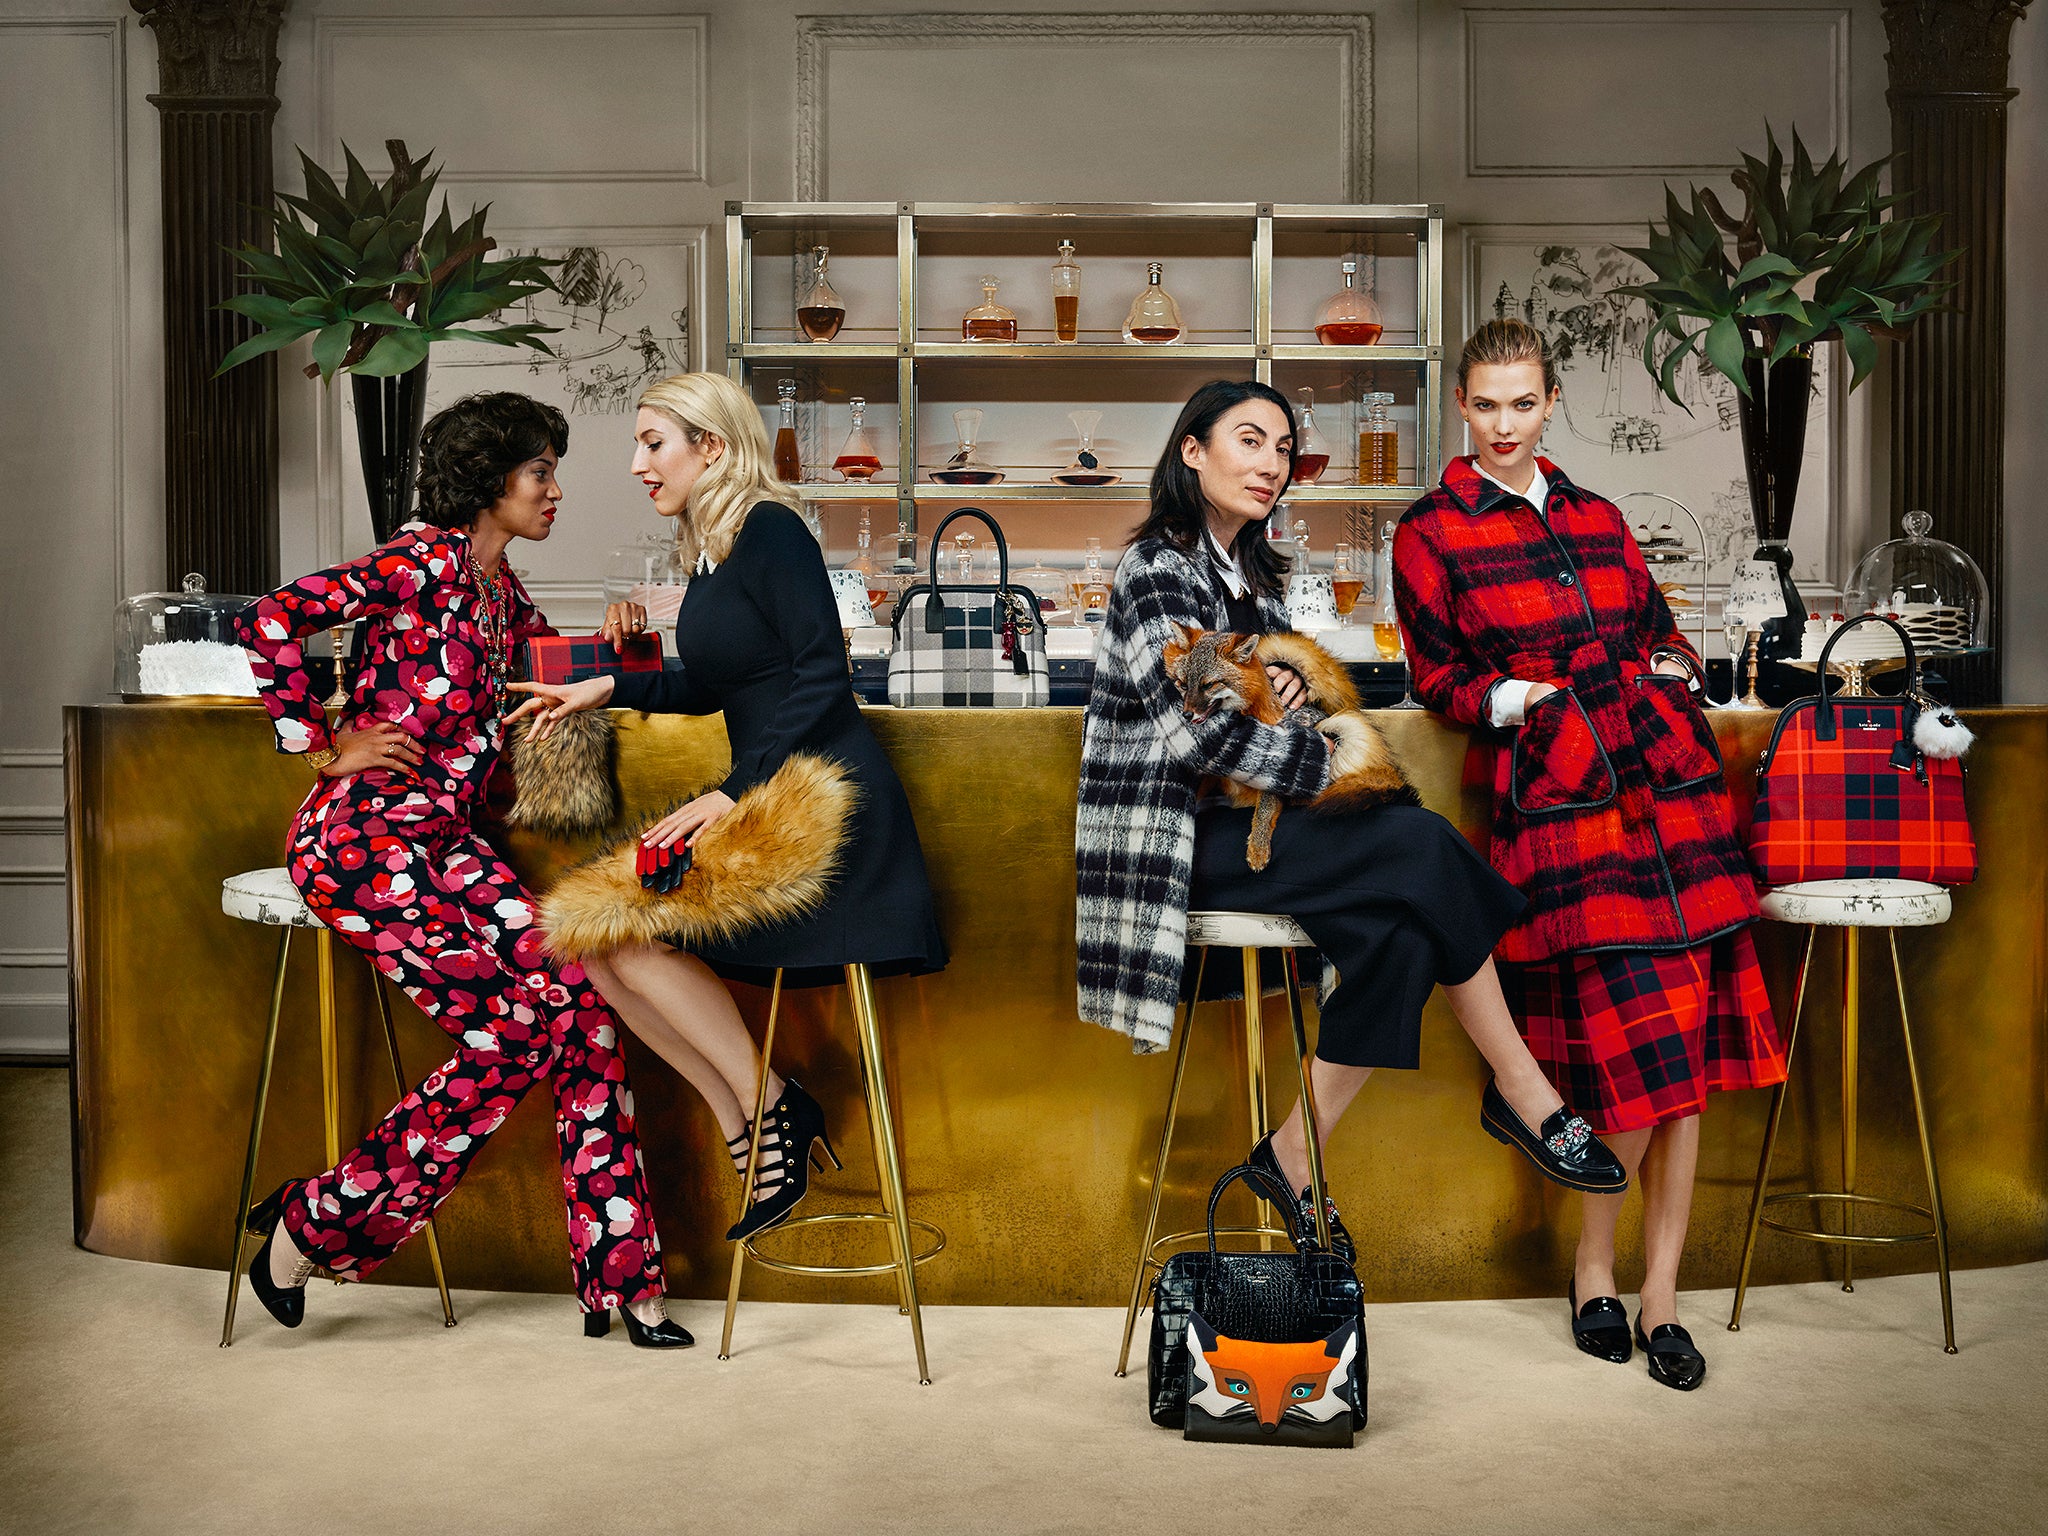 Accessible luxury lines from Kate Spade a/w ’15